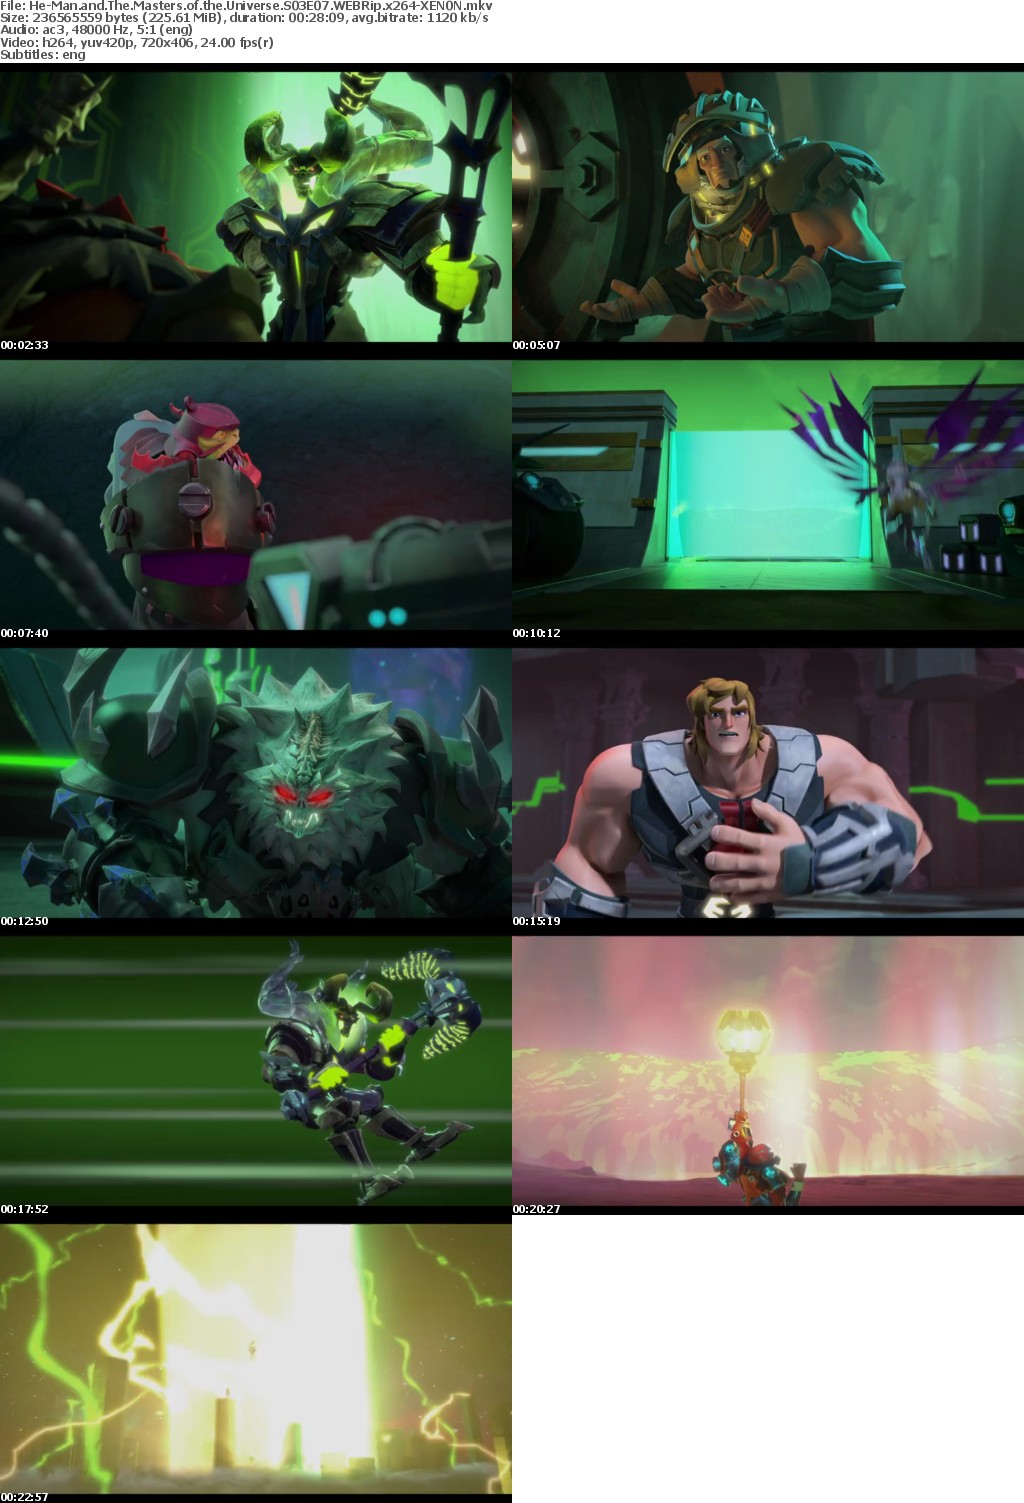 He-Man and The Masters of the Universe S03E07 WEBRip x264-XEN0N